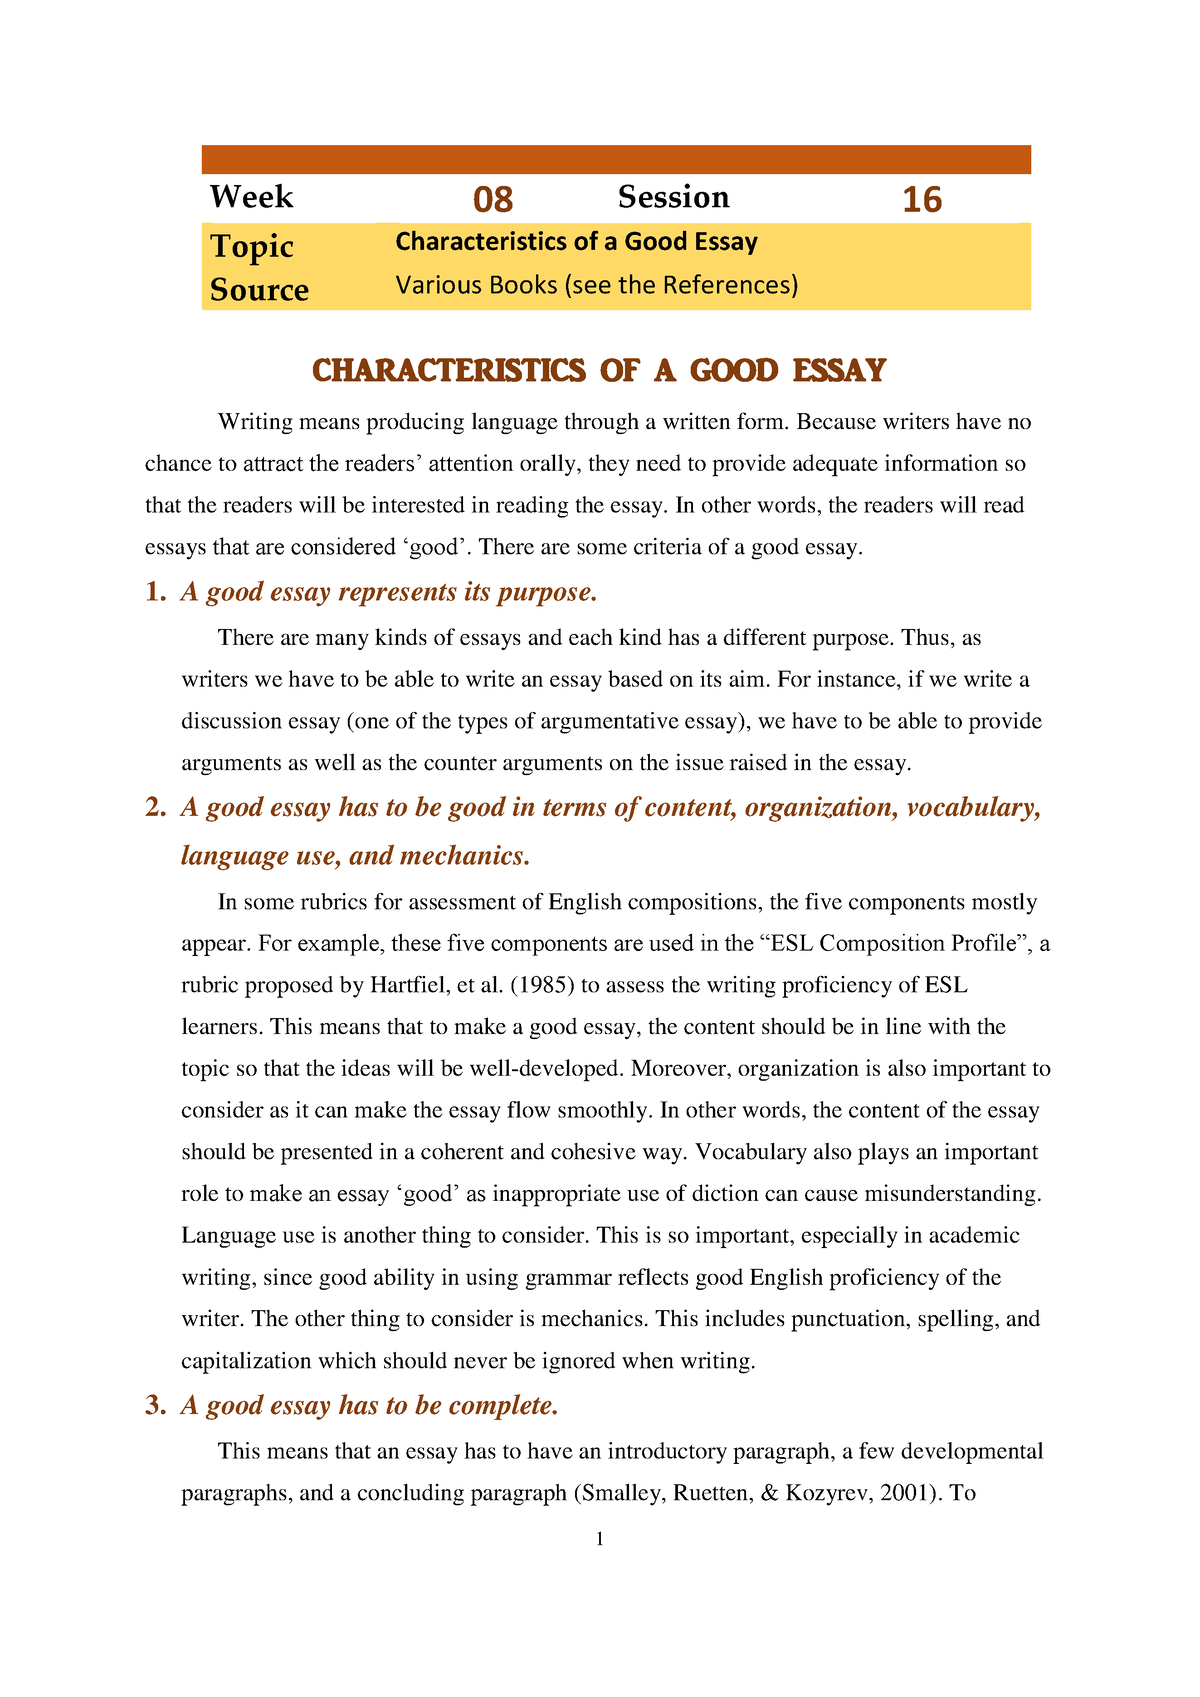 an essay about the characteristics